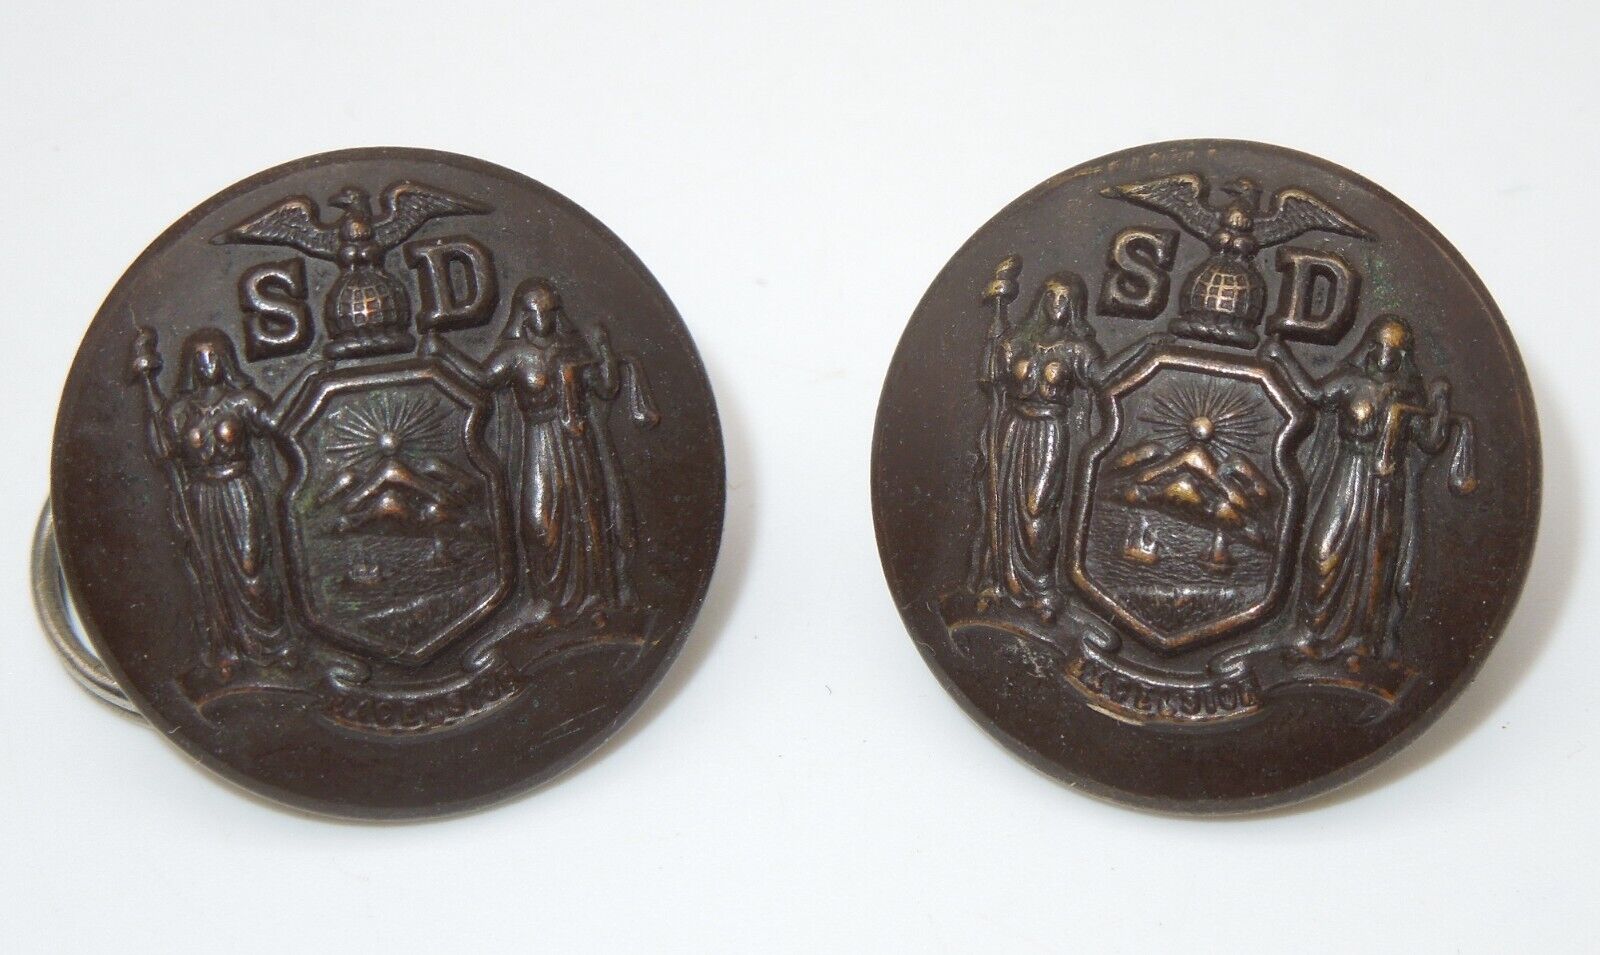 Original 1800's - 1900's New York State SD Military Buttons